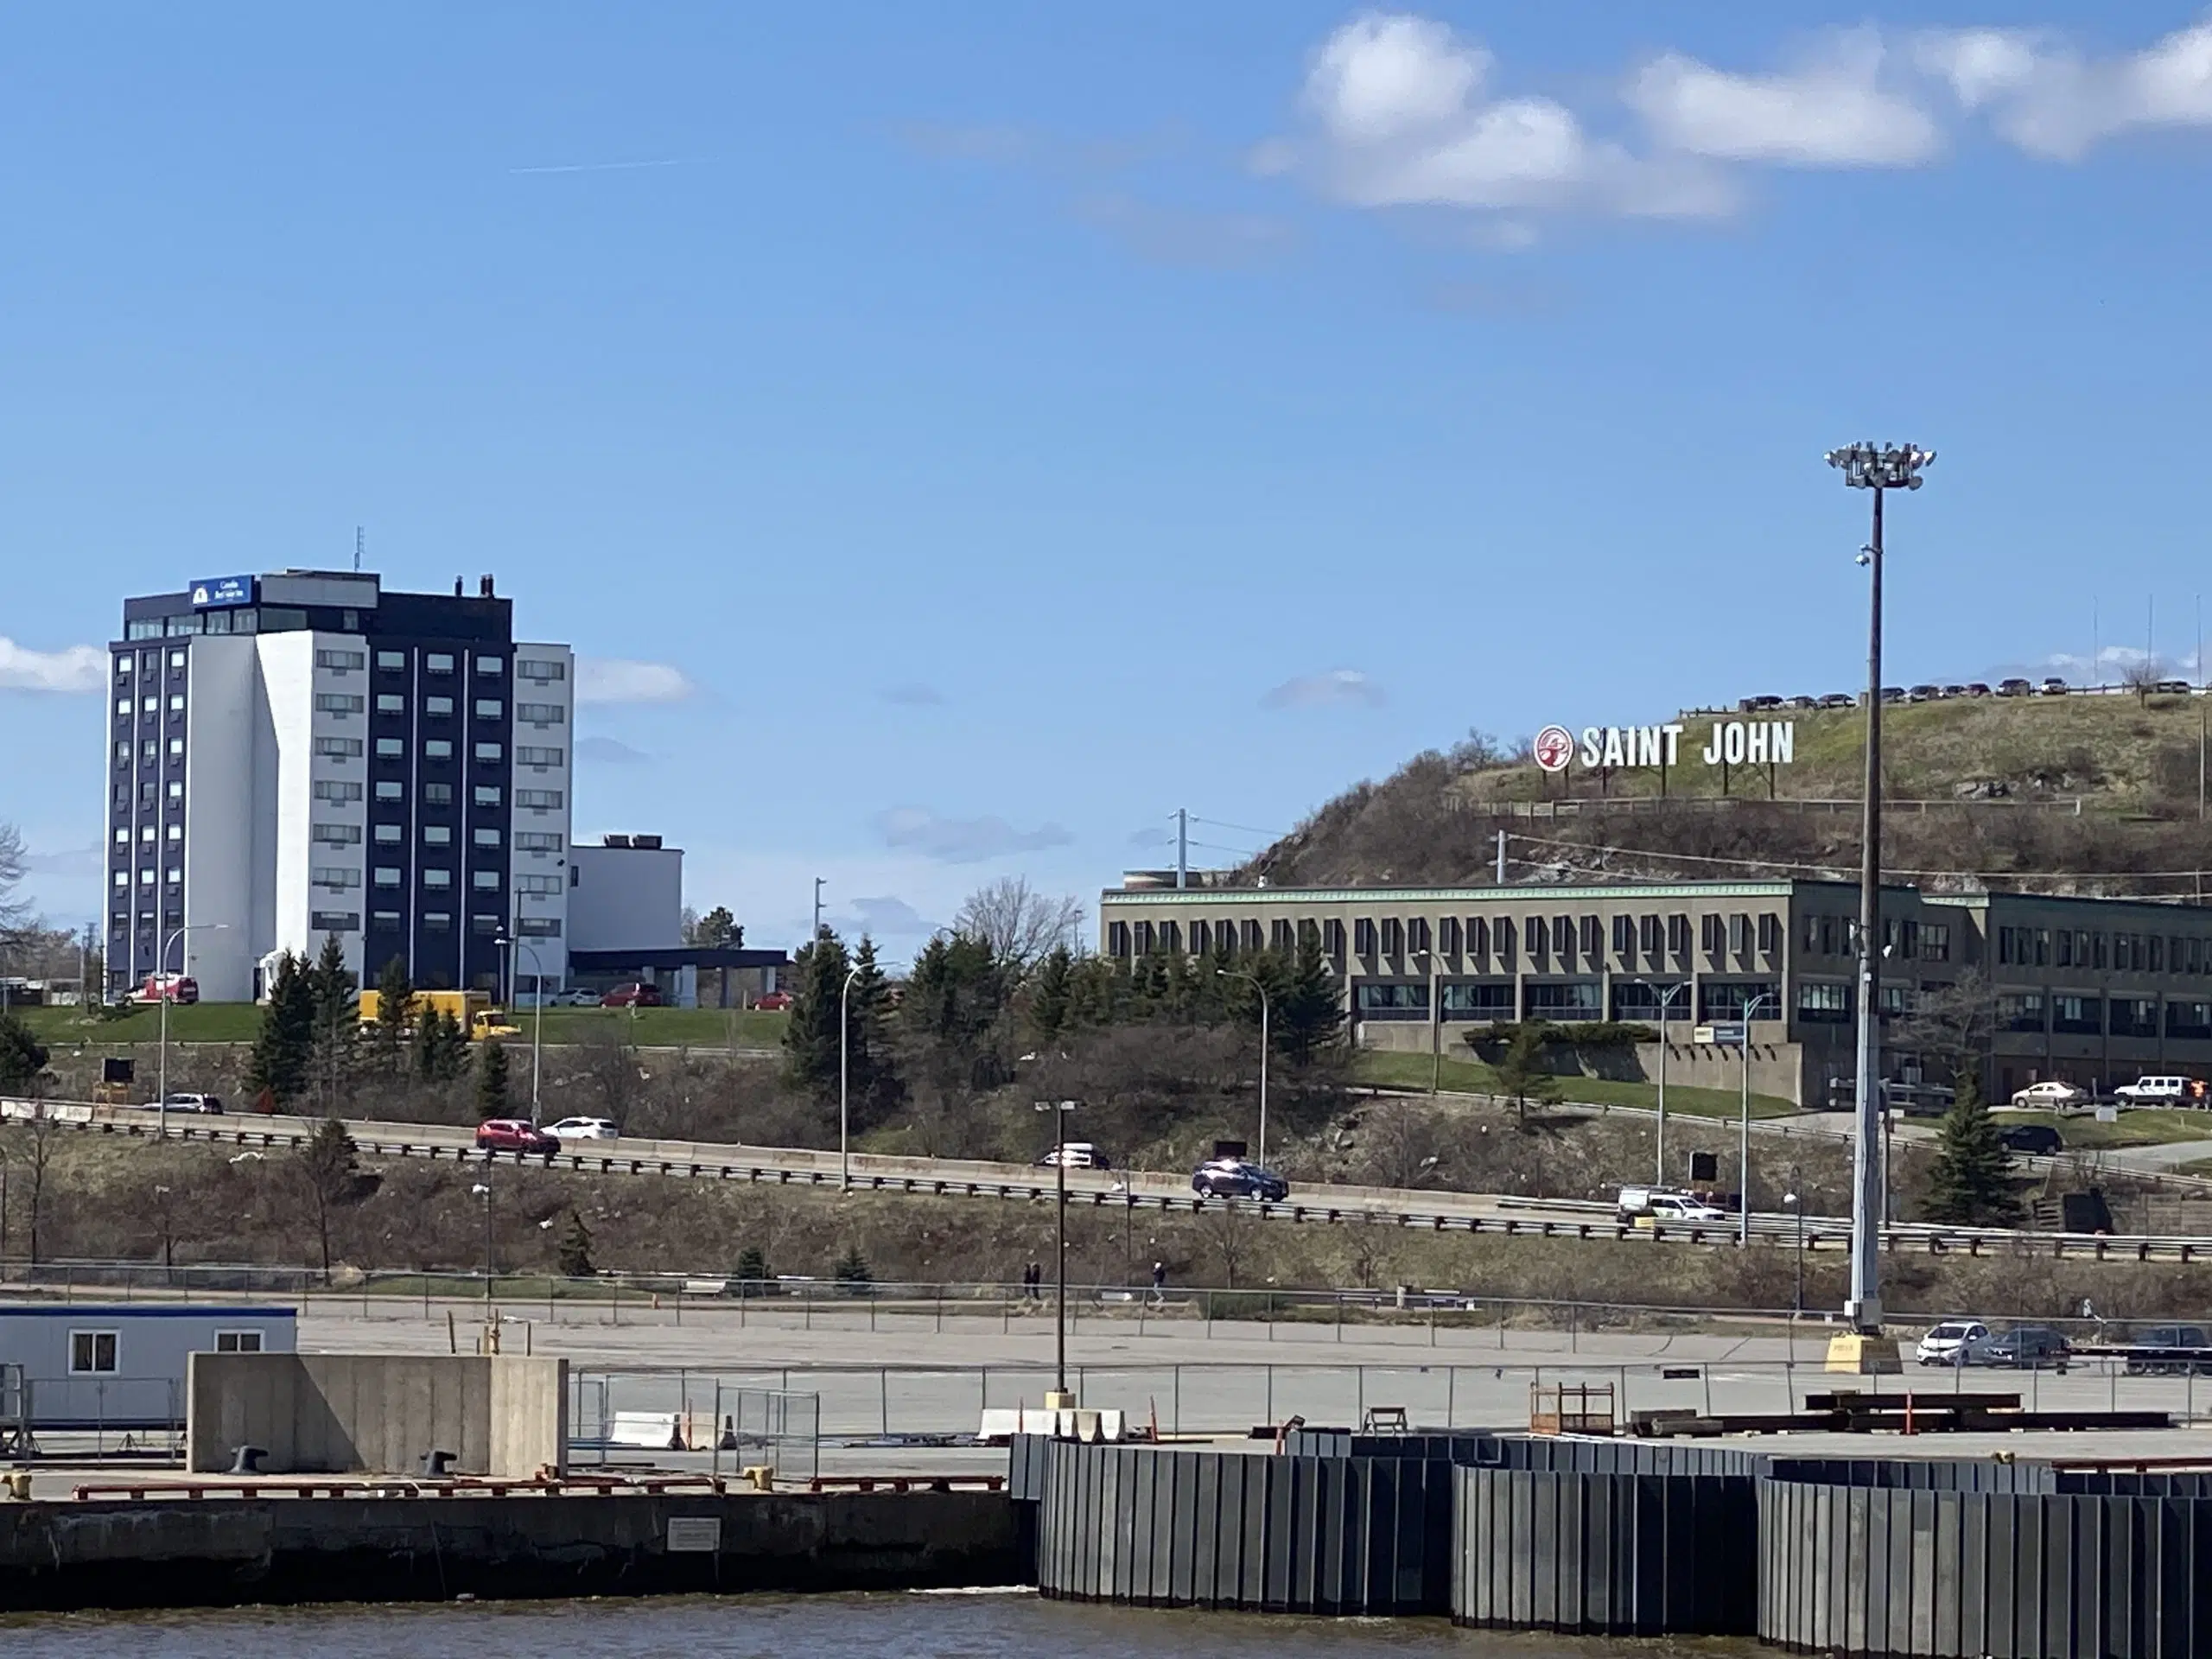 City of Saint John optimistic deal can be reached with inside workers